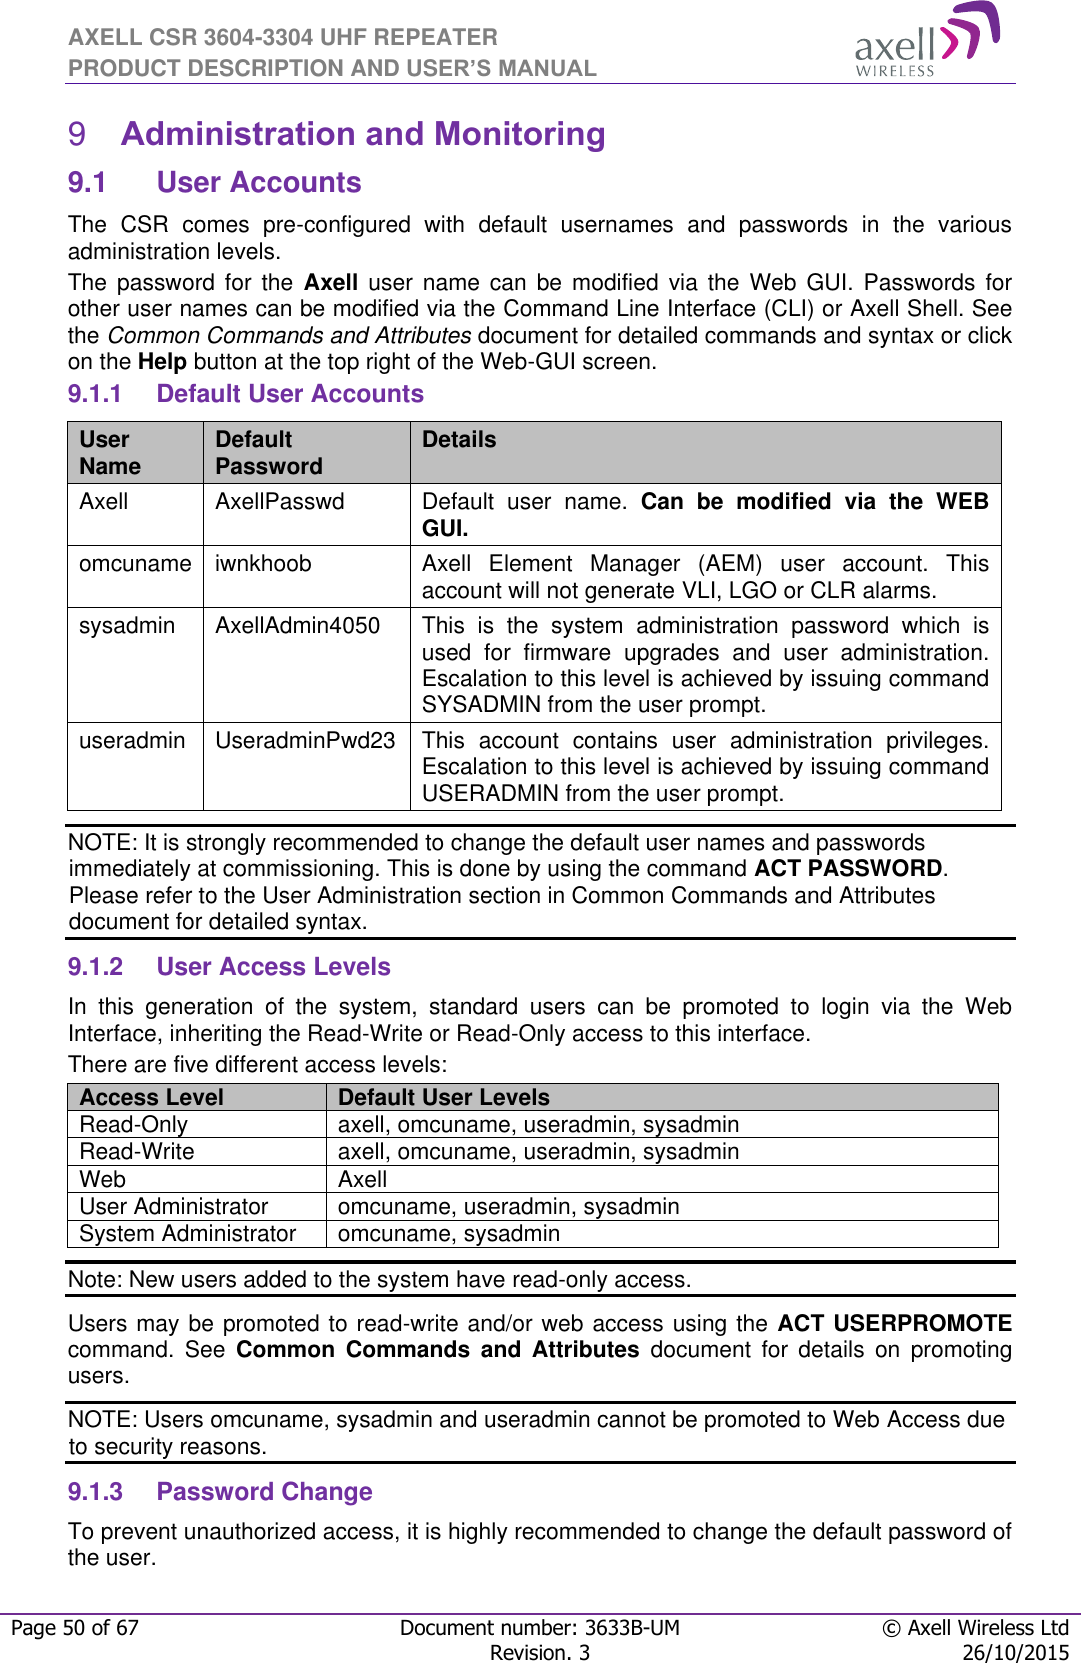 AXELL CSR 3604-3304 UHF REPEATER PRODUCT DESCRIPTION AND USER’S MANUAL  Page 50 of 67 Document number: 3633B-UM © Axell Wireless Ltd  Revision. 3 26/10/2015   Administration and Monitoring 99.1  User Accounts The  CSR  comes  pre-configured  with  default  usernames  and  passwords  in  the  various administration levels. The  password  for  the  Axell  user  name  can  be  modified  via  the Web  GUI.  Passwords  for other user names can be modified via the Command Line Interface (CLI) or Axell Shell. See the Common Commands and Attributes document for detailed commands and syntax or click on the Help button at the top right of the Web-GUI screen. 9.1.1  Default User Accounts User Name Default Password Details Axell AxellPasswd Default  user  name.  Can  be  modified  via  the  WEB GUI. omcuname iwnkhoob Axell  Element  Manager  (AEM)  user  account.  This account will not generate VLI, LGO or CLR alarms. sysadmin AxellAdmin4050 This  is  the  system  administration  password  which  is used  for  firmware  upgrades  and  user  administration. Escalation to this level is achieved by issuing command SYSADMIN from the user prompt. useradmin UseradminPwd23 This  account  contains  user  administration  privileges. Escalation to this level is achieved by issuing command USERADMIN from the user prompt. NOTE: It is strongly recommended to change the default user names and passwords immediately at commissioning. This is done by using the command ACT PASSWORD. Please refer to the User Administration section in Common Commands and Attributes document for detailed syntax. 9.1.2  User Access Levels In  this  generation  of  the  system,  standard  users  can  be  promoted  to  login  via  the  Web Interface, inheriting the Read-Write or Read-Only access to this interface. There are five different access levels: Access Level Default User Levels Read-Only axell, omcuname, useradmin, sysadmin Read-Write axell, omcuname, useradmin, sysadmin Web Axell User Administrator omcuname, useradmin, sysadmin System Administrator omcuname, sysadmin Note: New users added to the system have read-only access. Users may be promoted to read-write and/or web access using the ACT USERPROMOTE command.  See  Common  Commands  and  Attributes  document  for  details  on  promoting users. NOTE: Users omcuname, sysadmin and useradmin cannot be promoted to Web Access due to security reasons. 9.1.3  Password Change To prevent unauthorized access, it is highly recommended to change the default password of the user.  